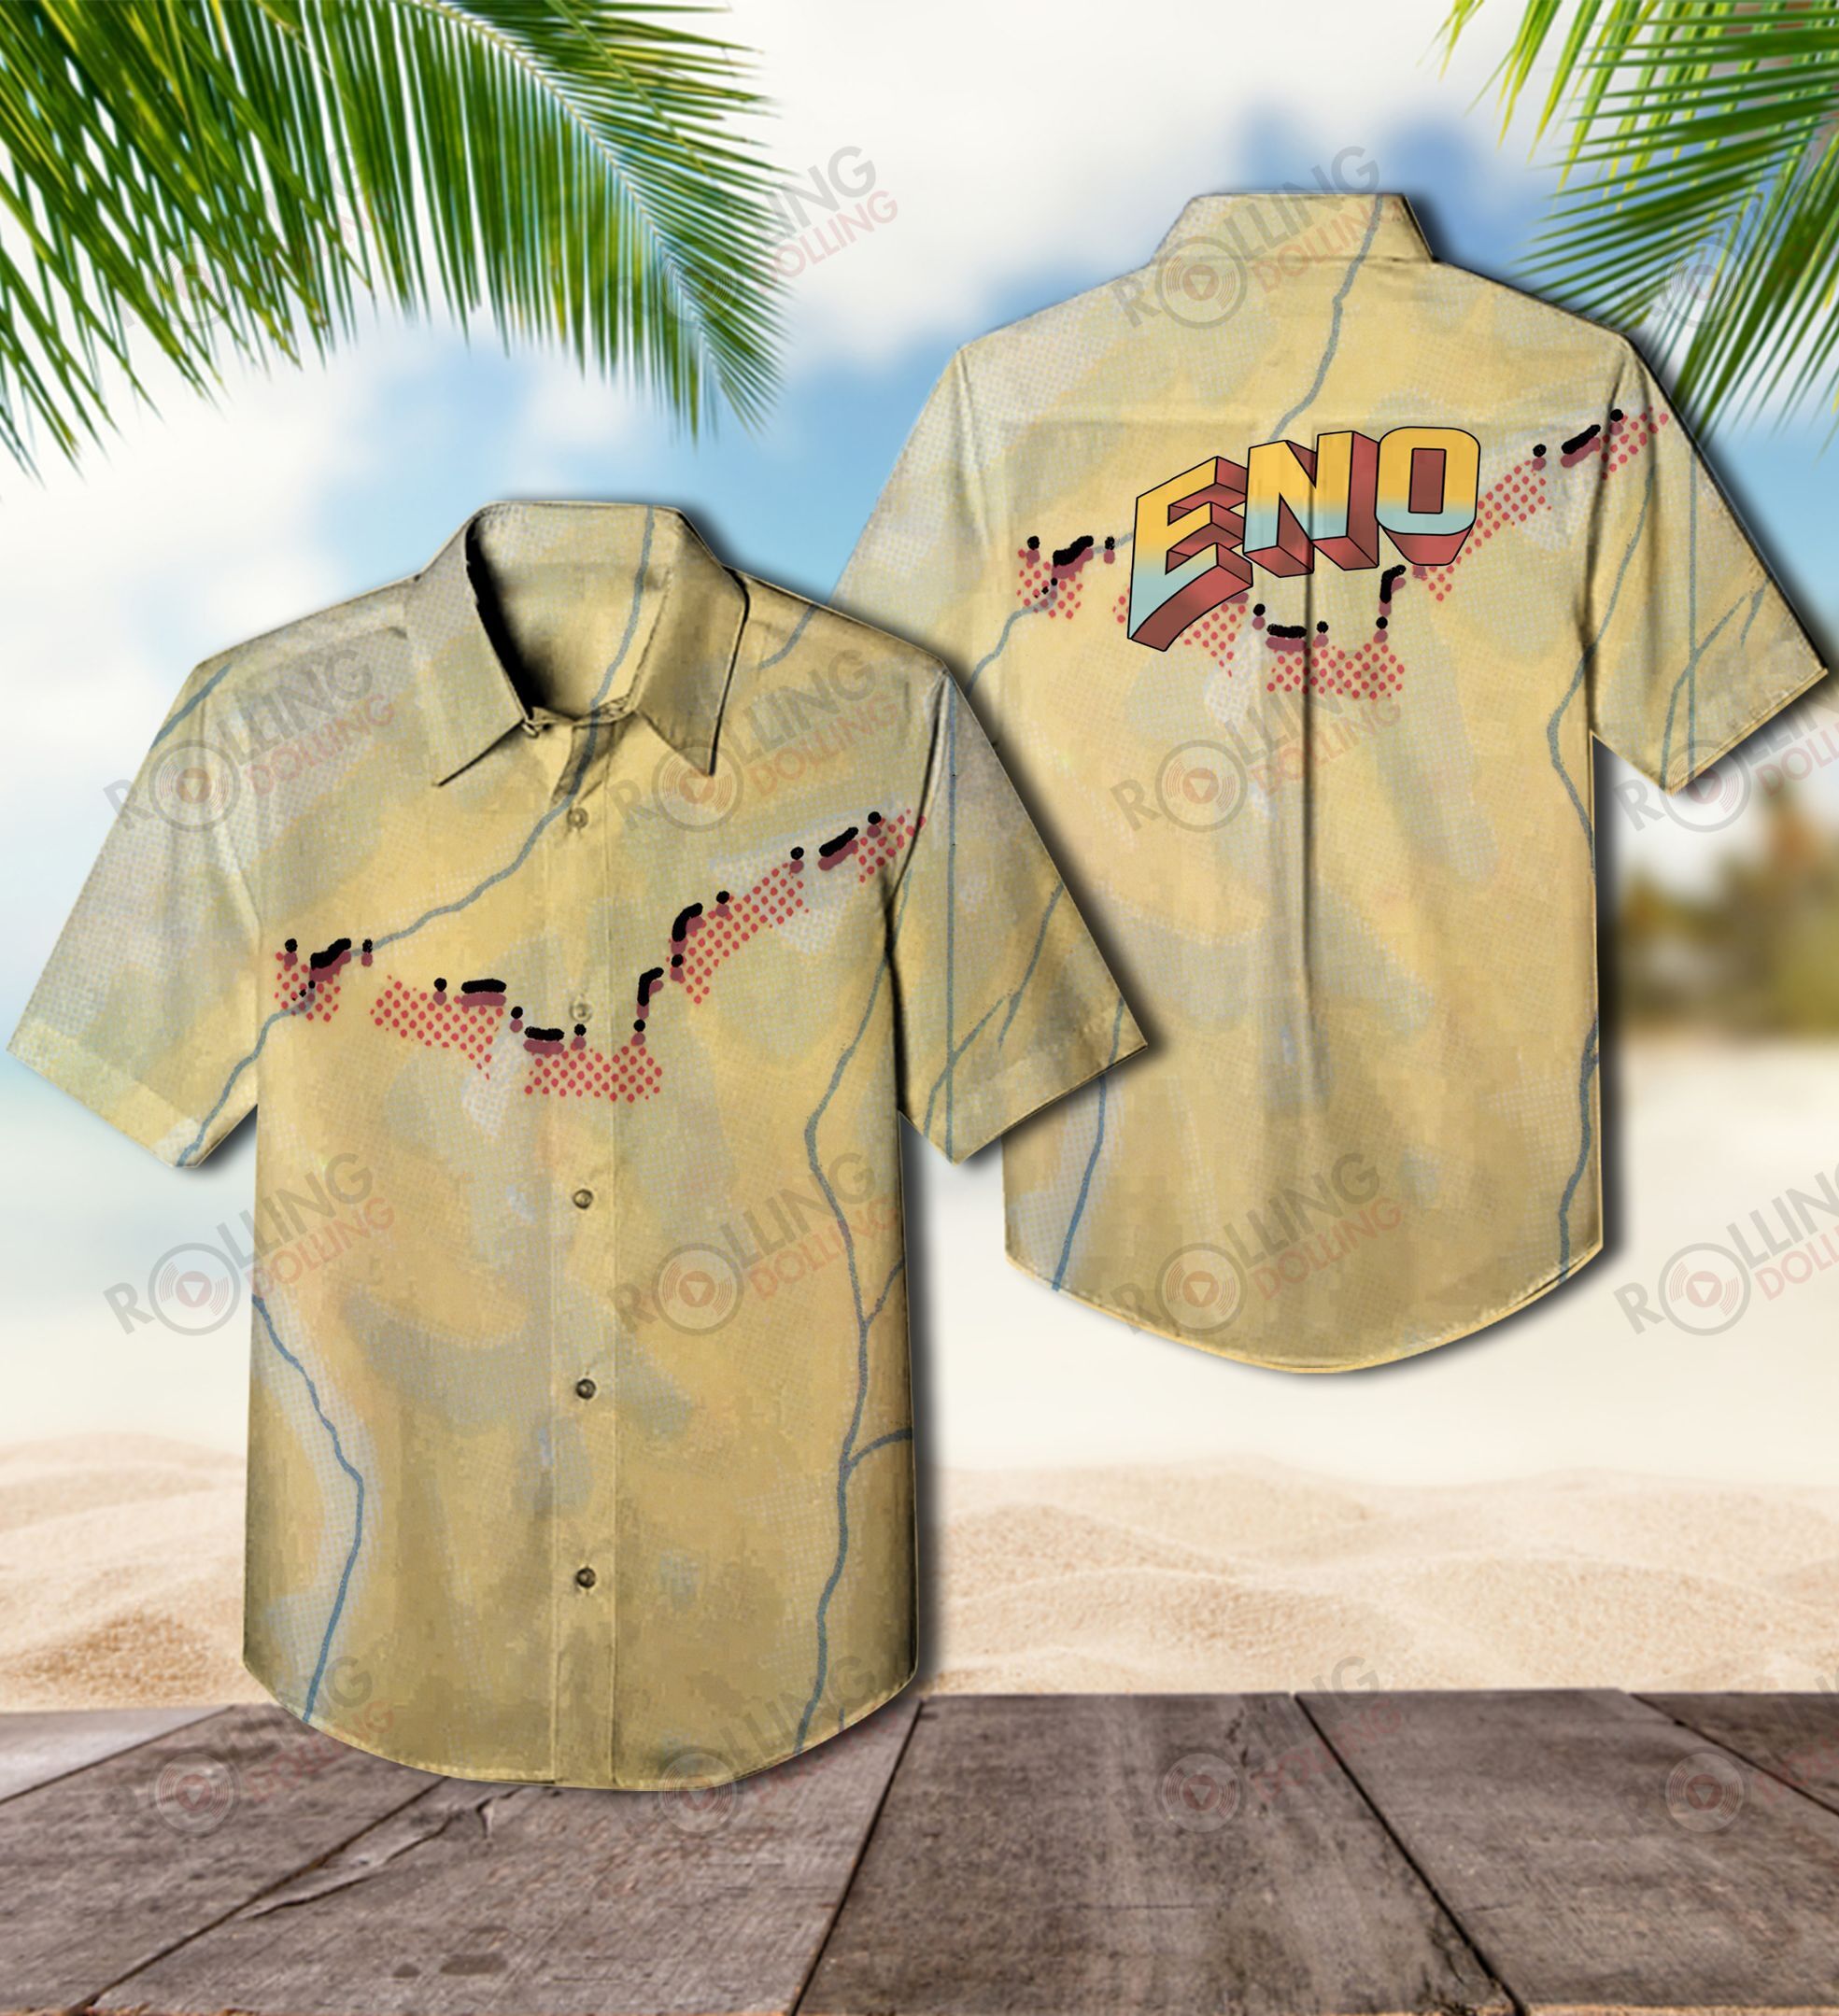 This would make a great gift for any fan who loves Hawaiian Shirt as well as Rock band 26